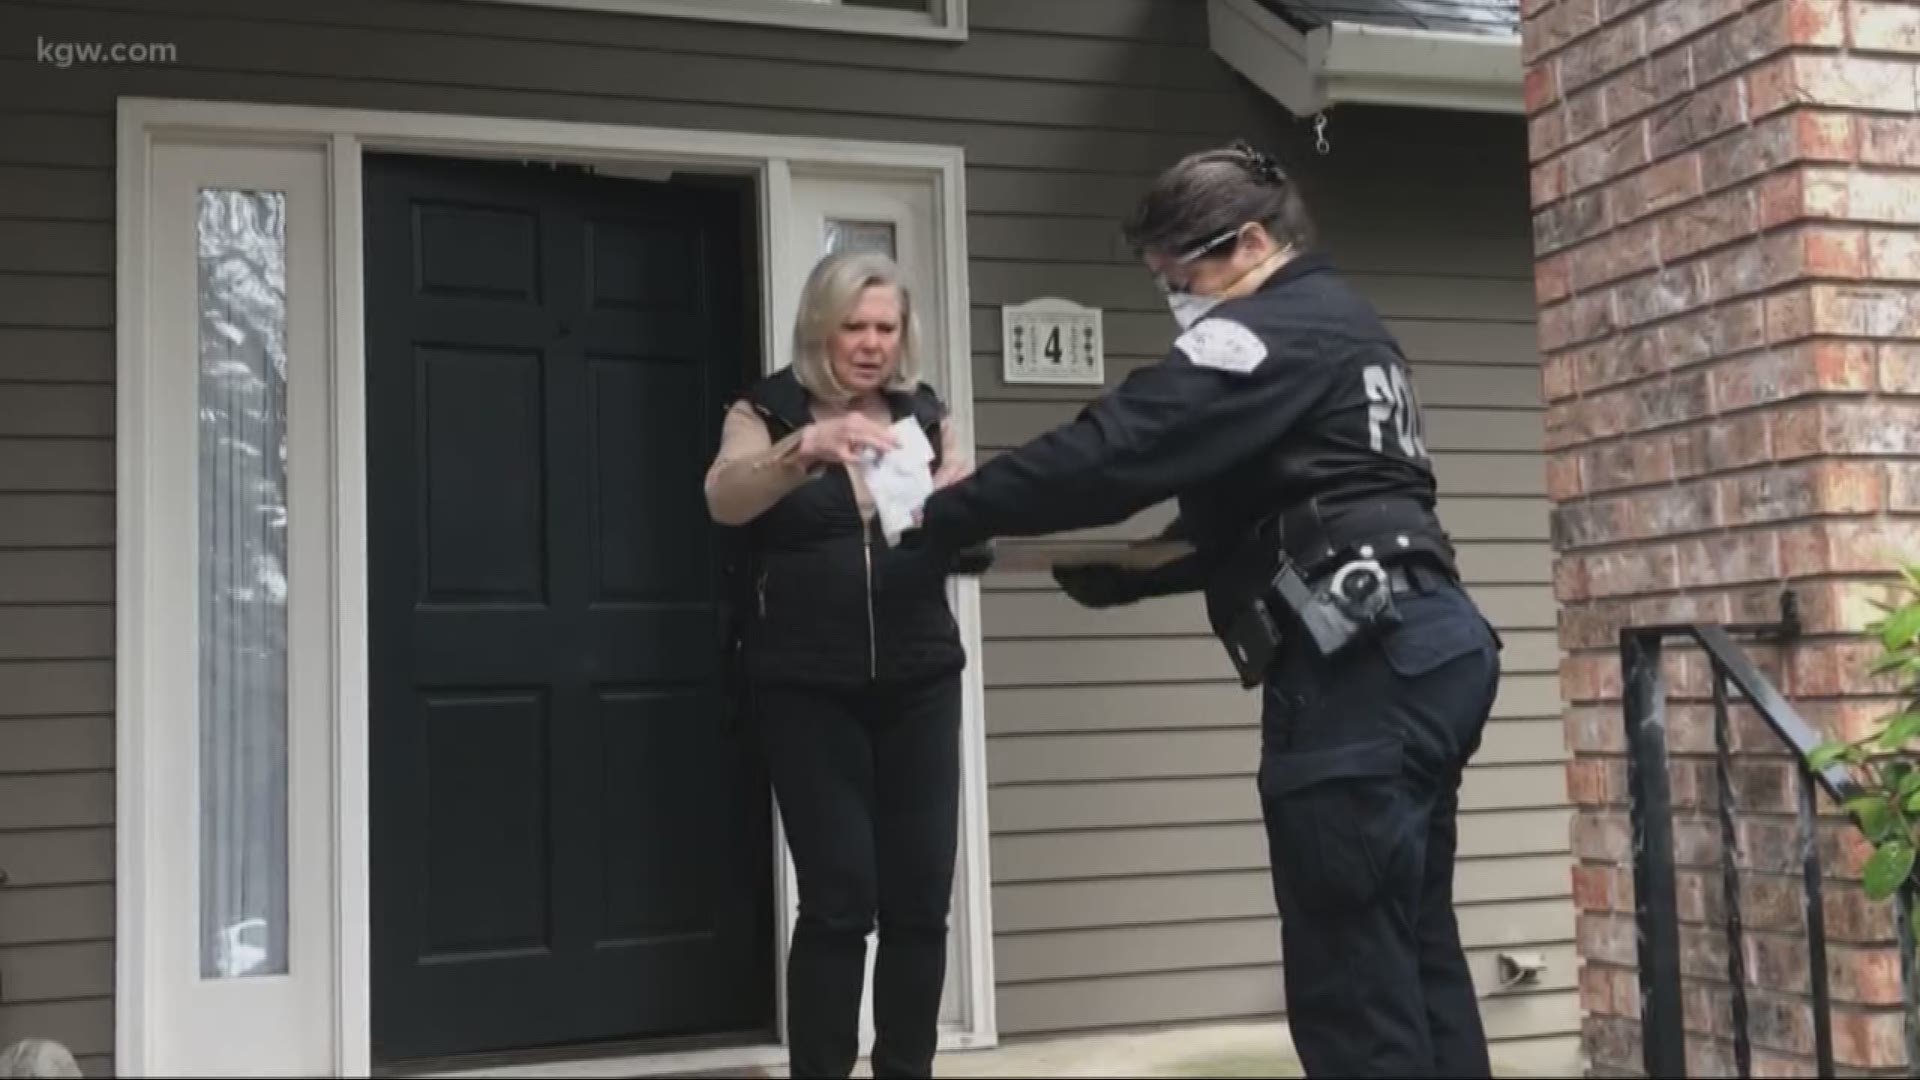 Helping seniors. Police are delivering prescriptions to those who can’t leave their homes.